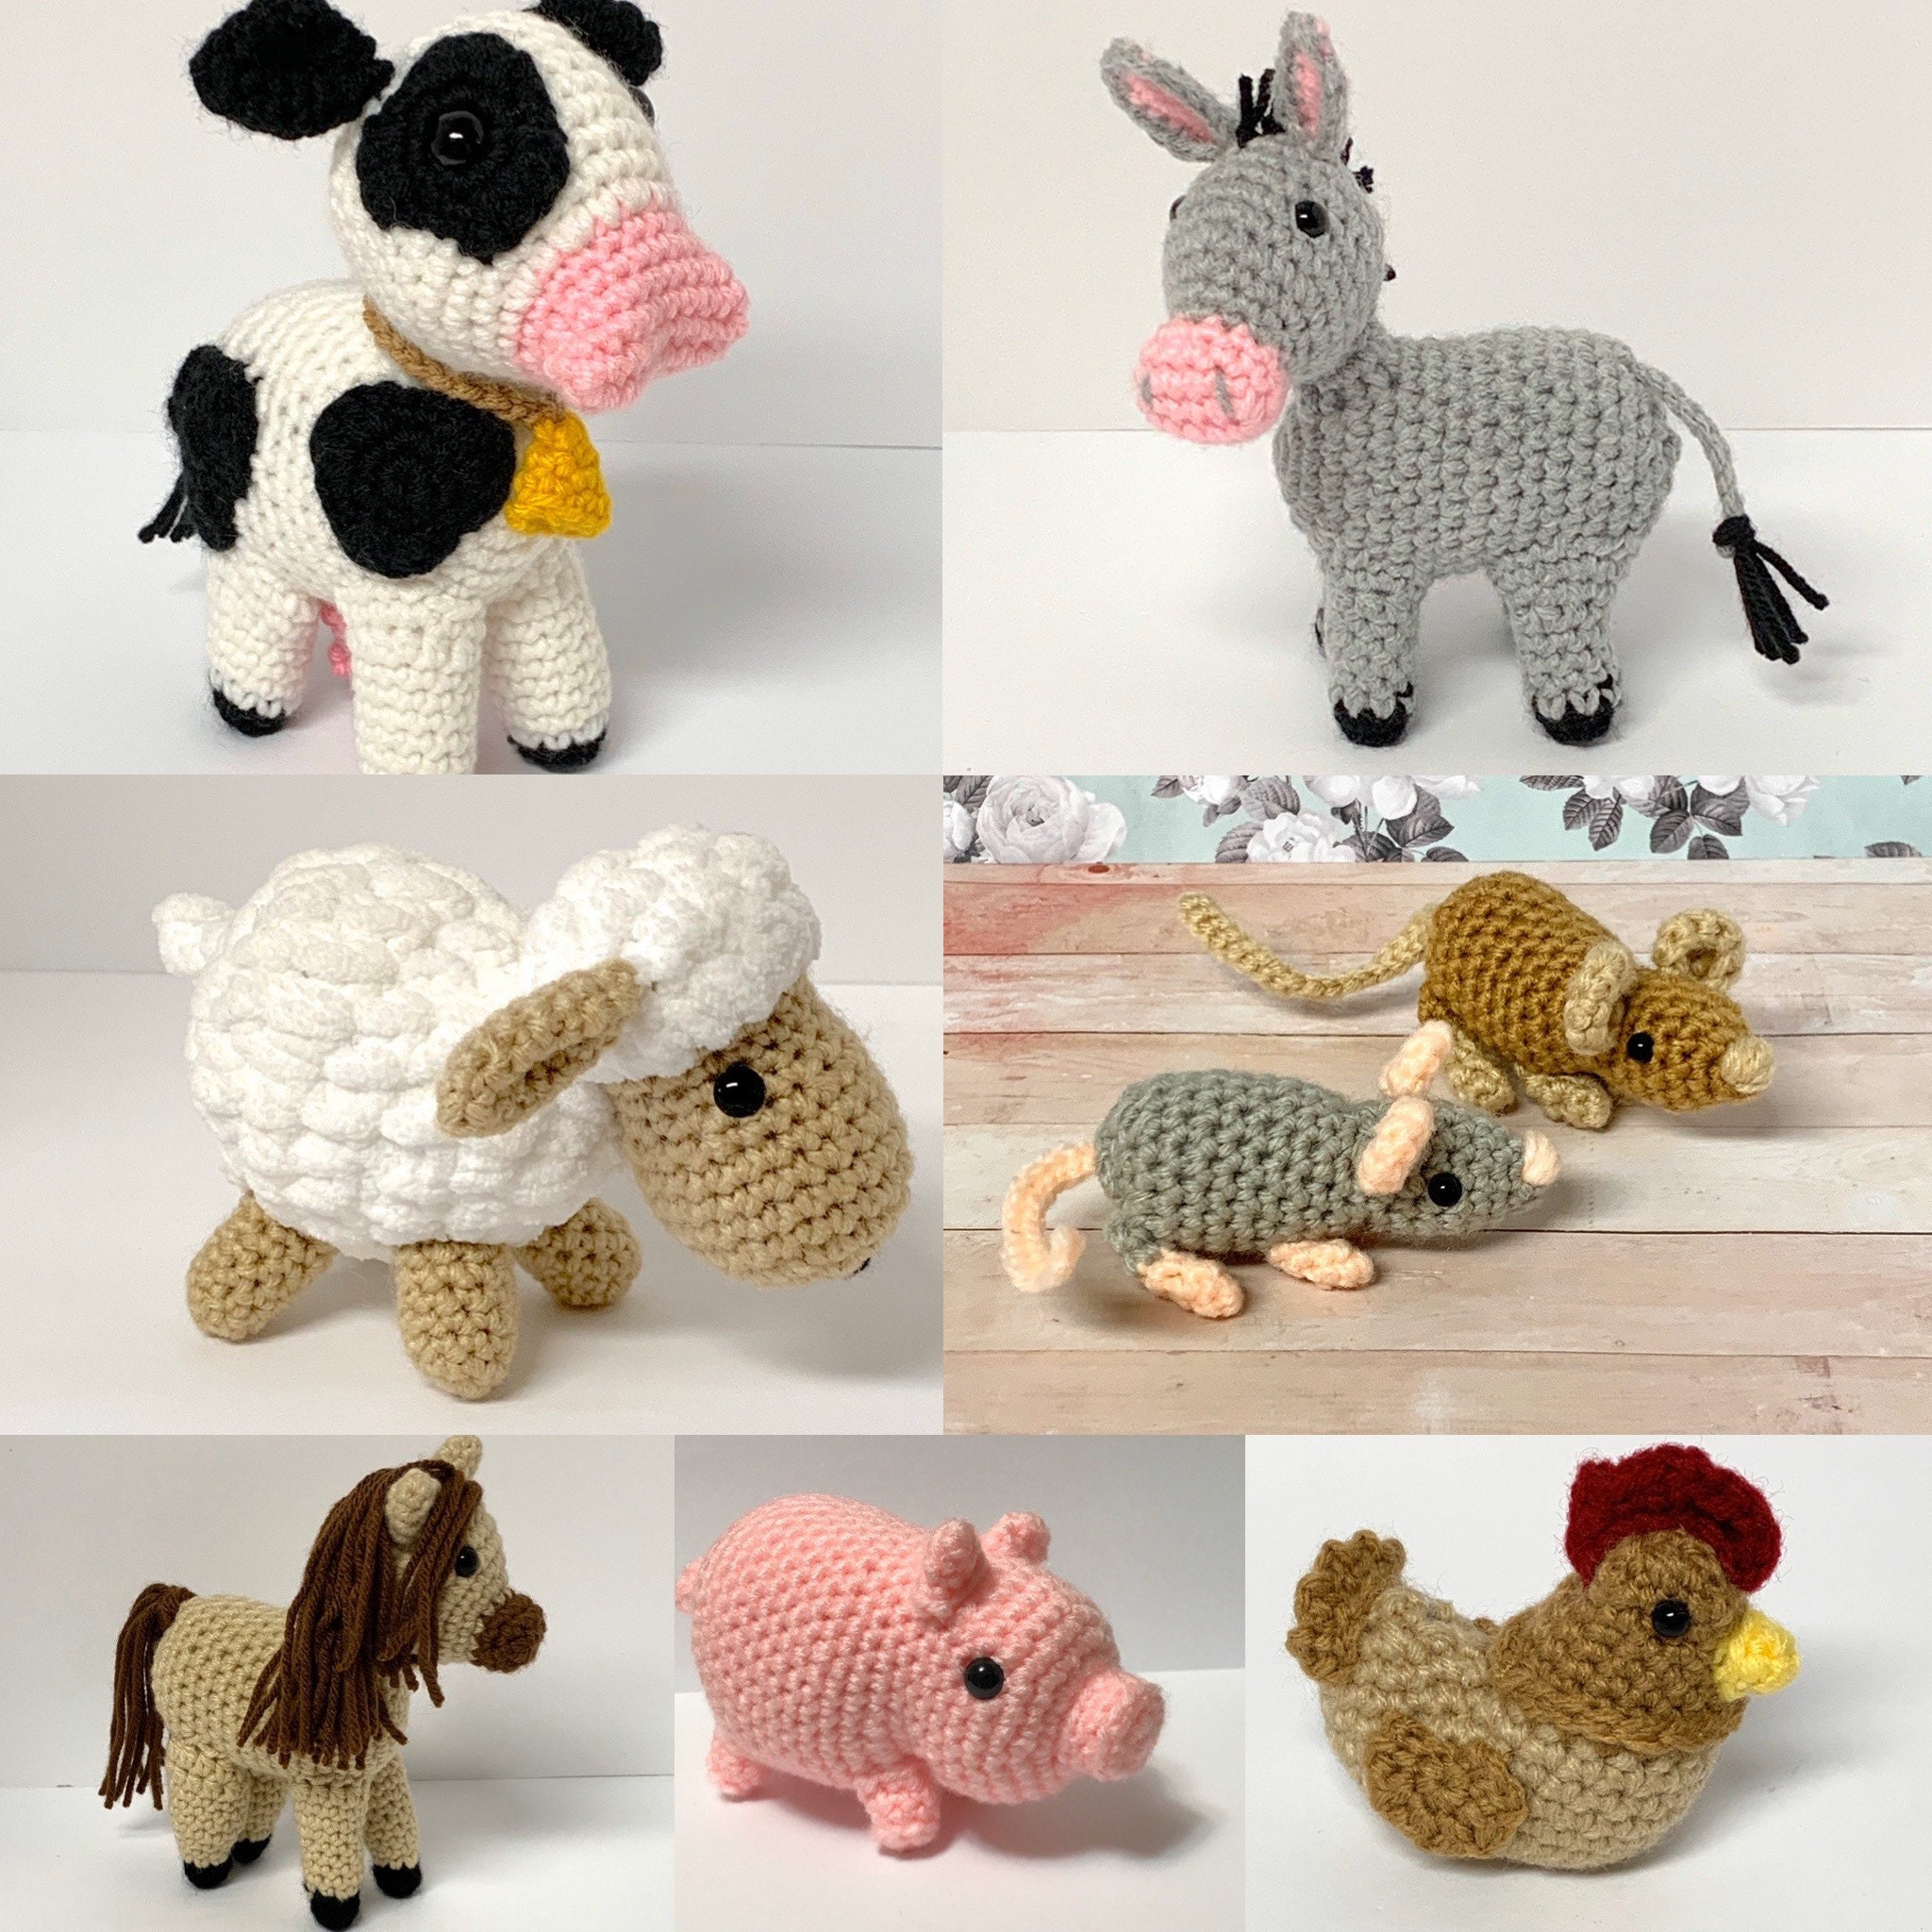 Buy Crochet Mini Toys: Frog, Chick, Sheep, Pig, Horse and Cow